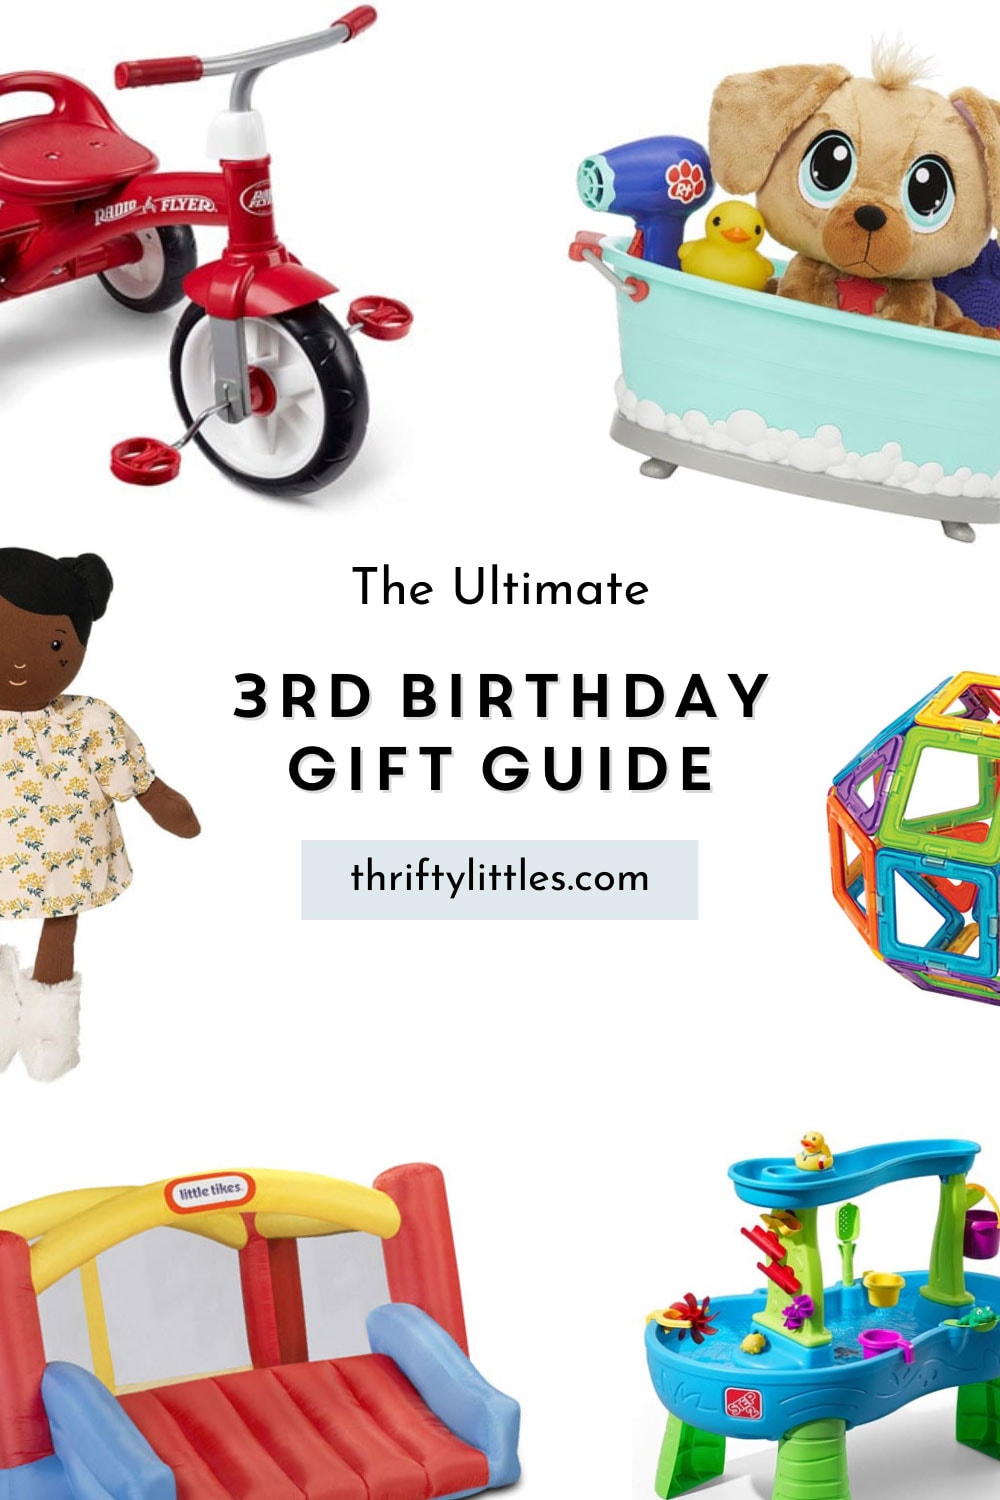 The Ultimate Third Birthday Gift Guide